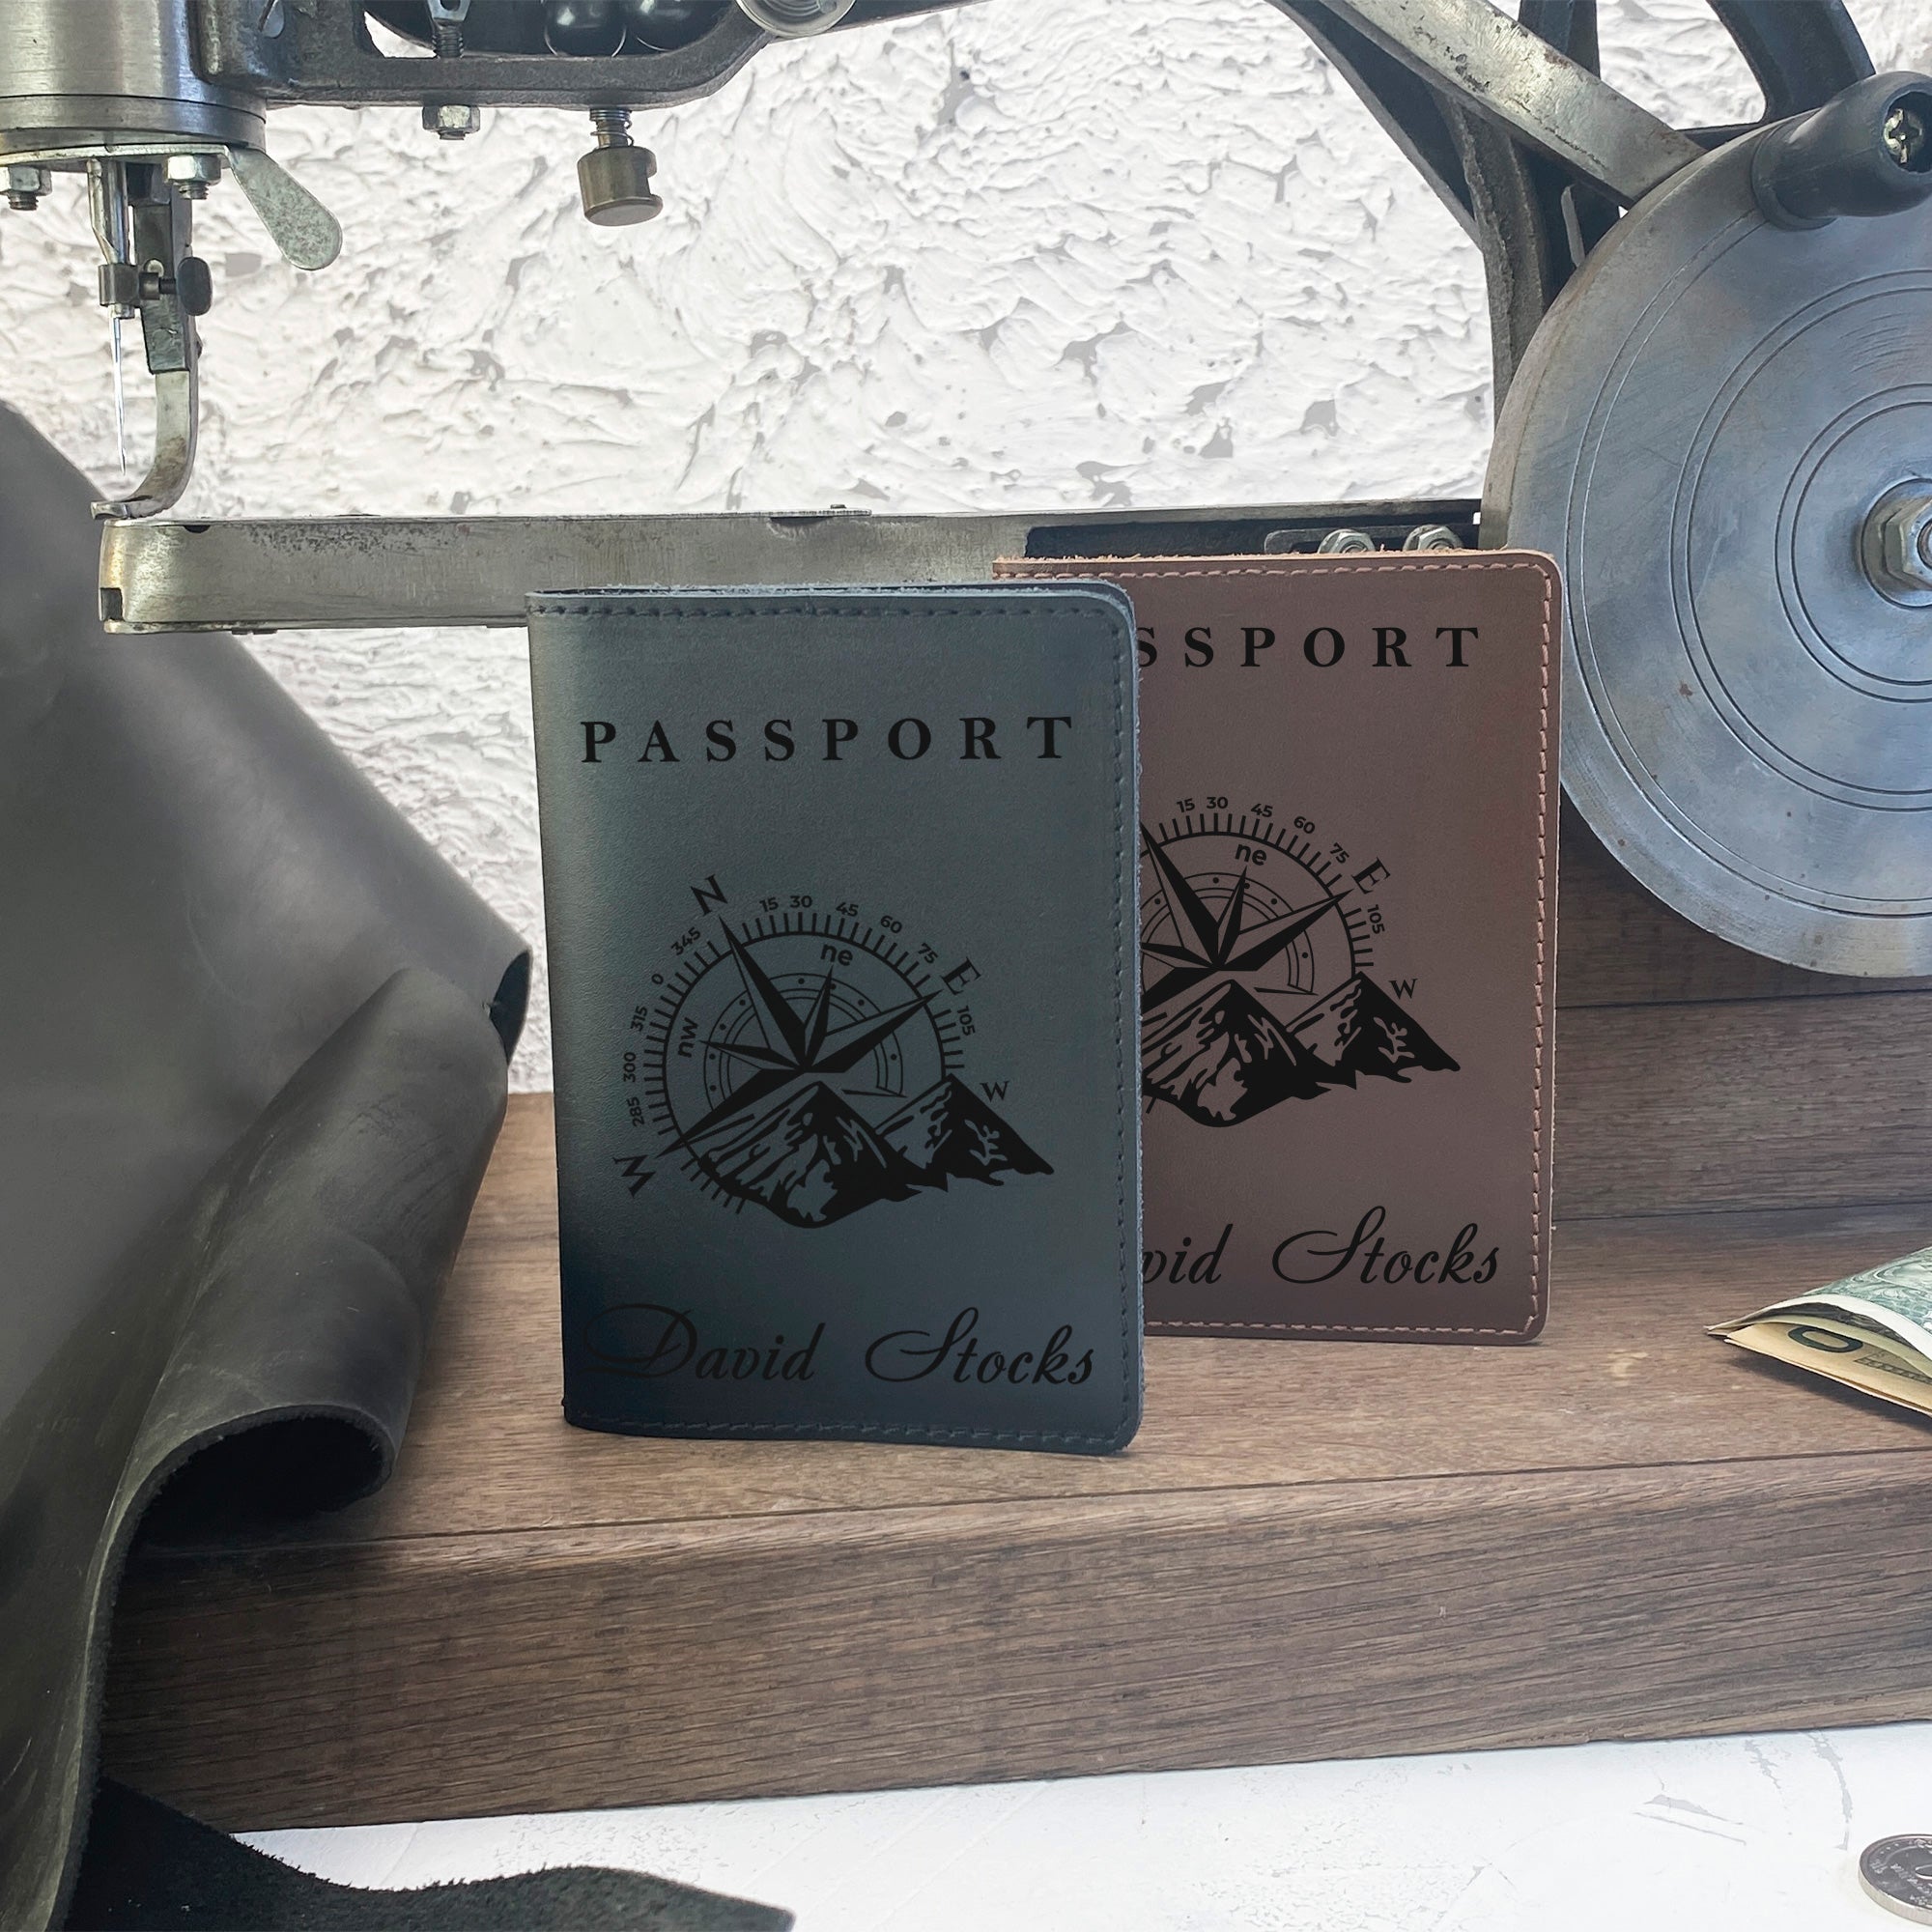 Personalized engraved Compas Leather Passport Cover Holder